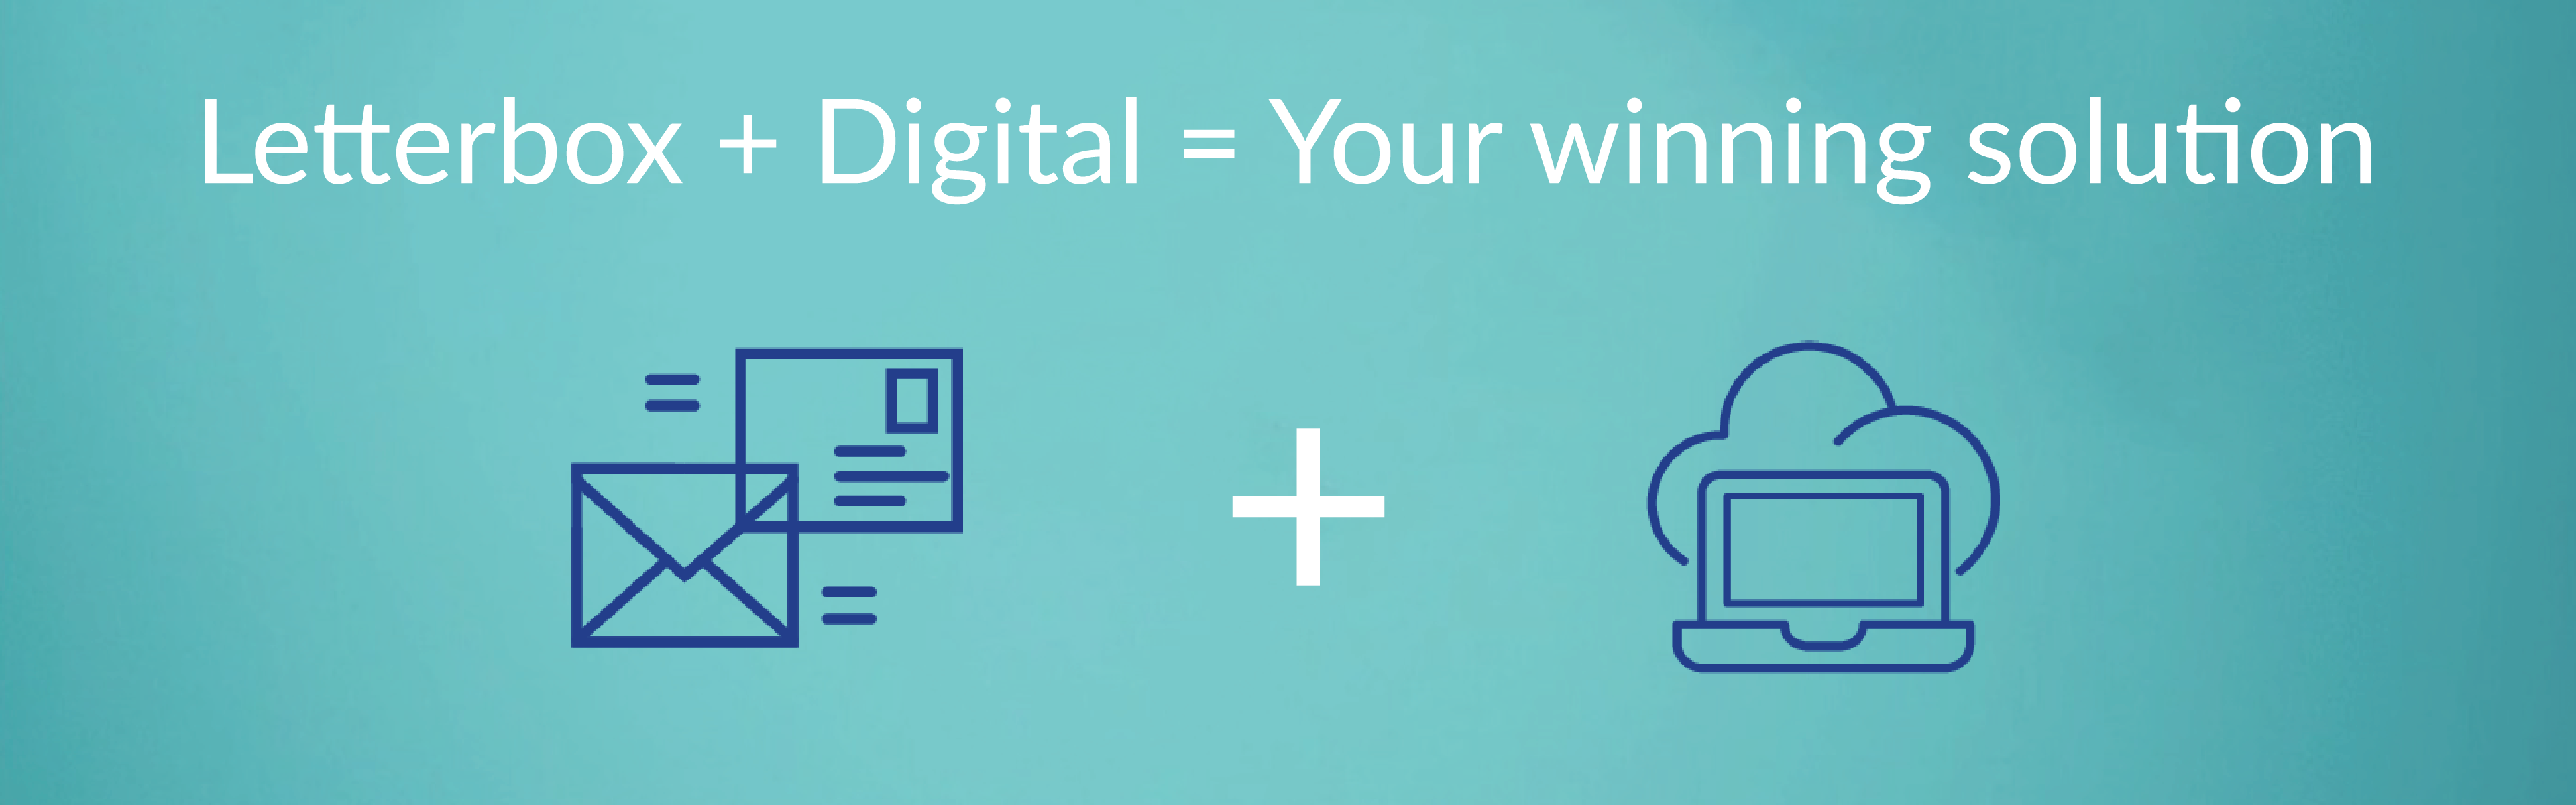 Letterbox + Digital = your winning solution